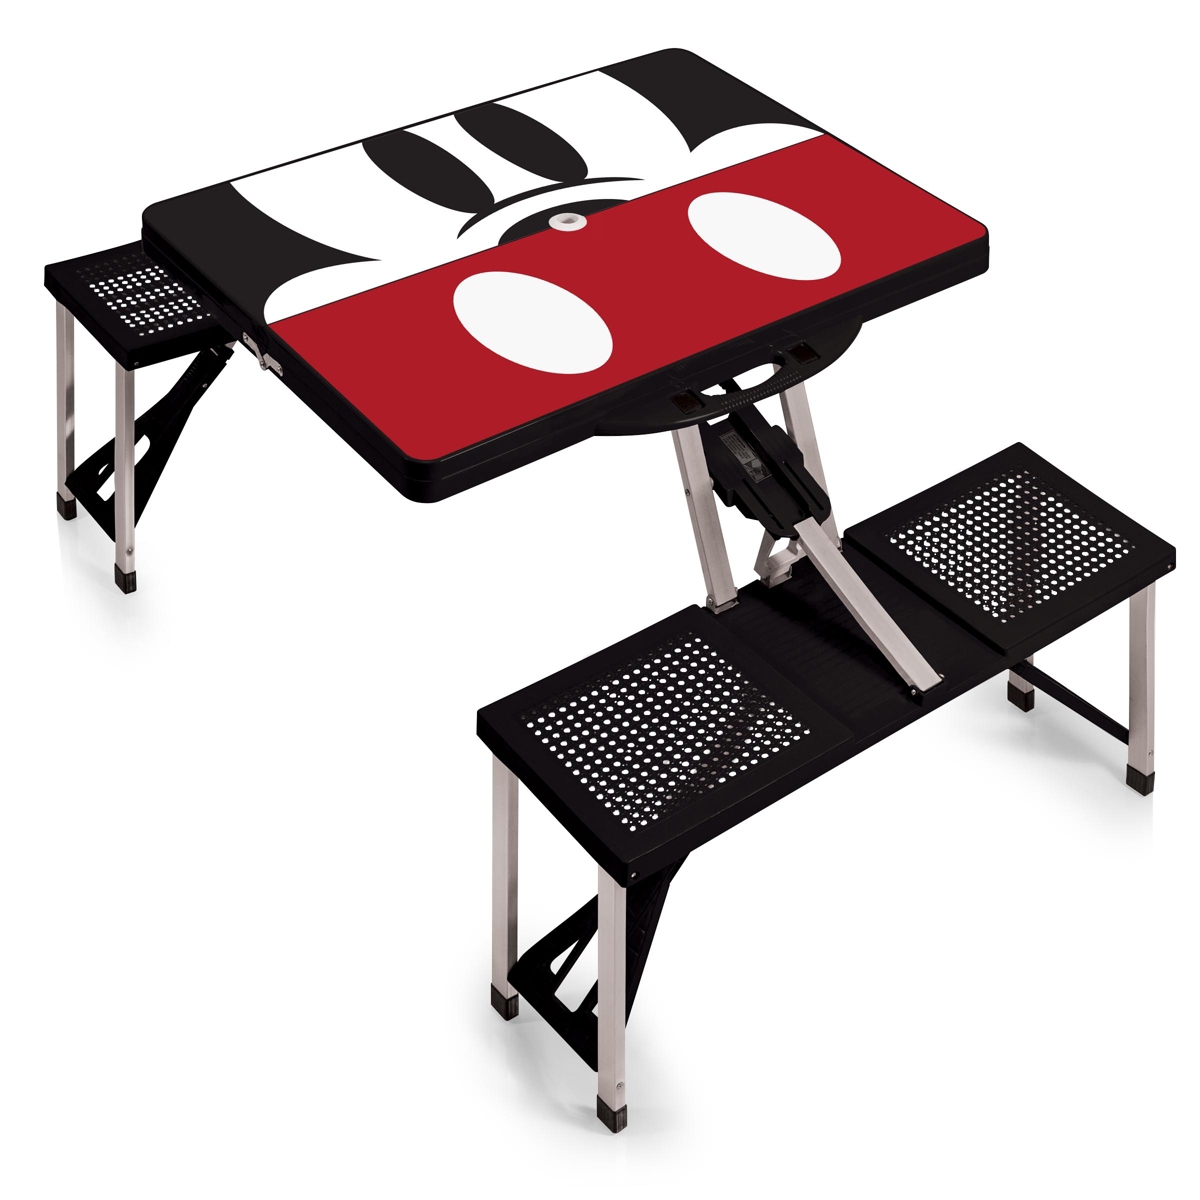 Disney's Mickey Mouse Silhouette Picnic Table Portable Folding Table with Seats - Black